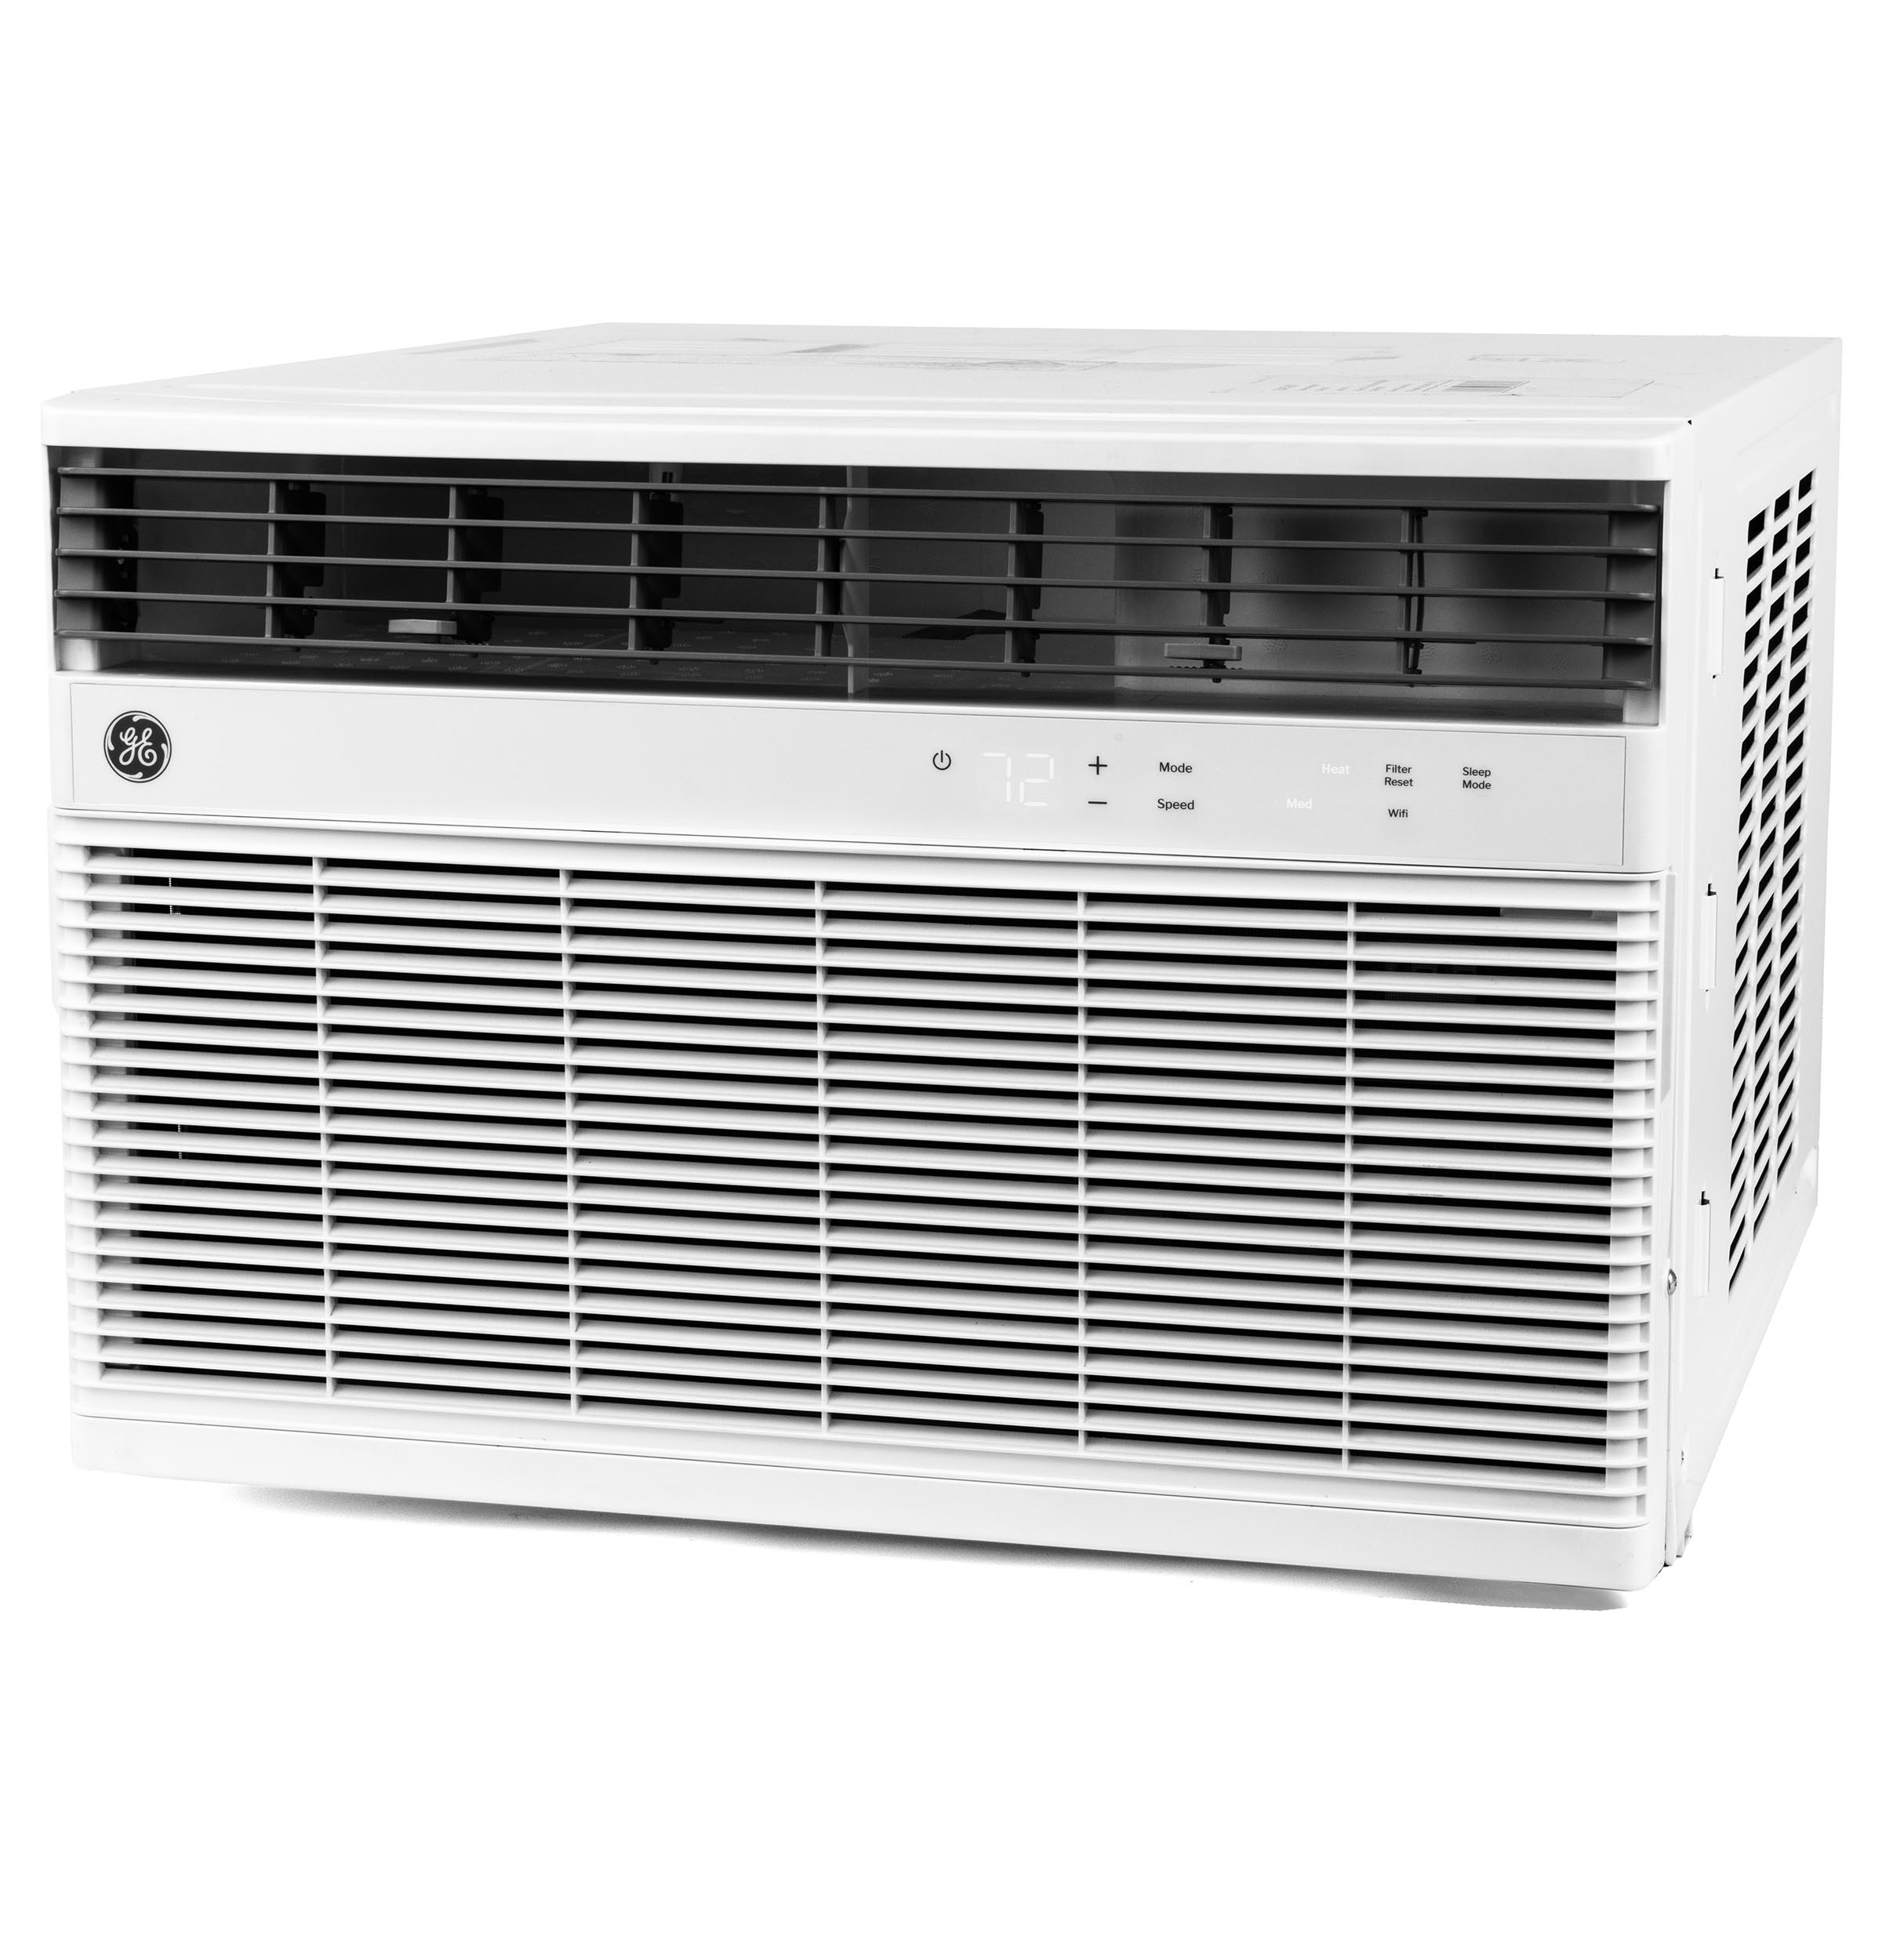 GE® 18,000 BTU Smart Heat/Cool Electronic Window Air Conditioner for Extra-Large Rooms up to 1000 sq. ft.